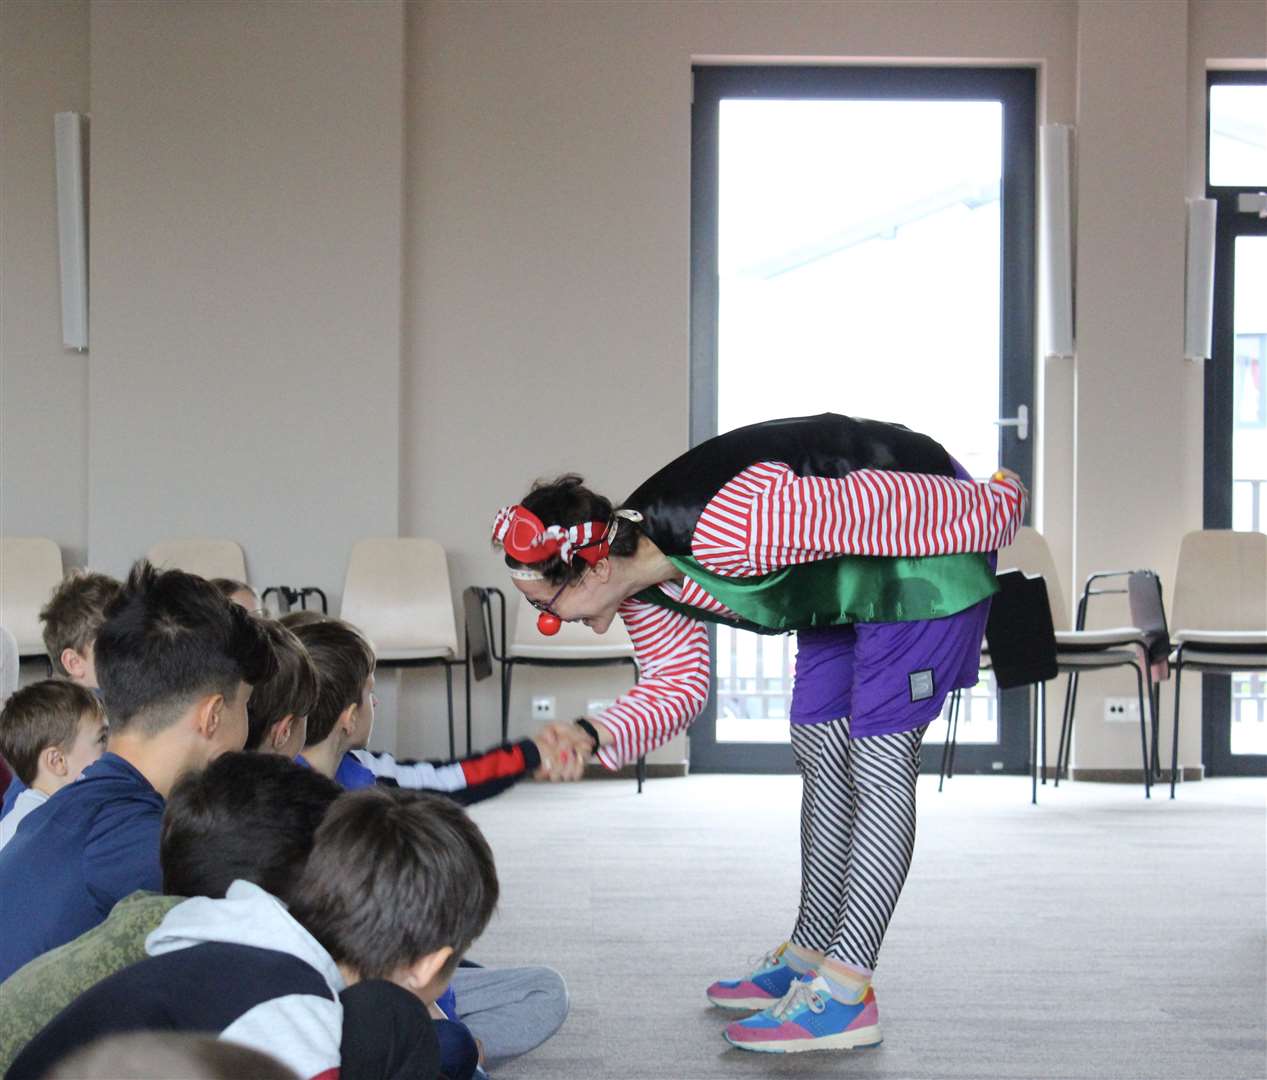 Clowns Without Borders UK performs and runs workshops for Ukrainian refugee children